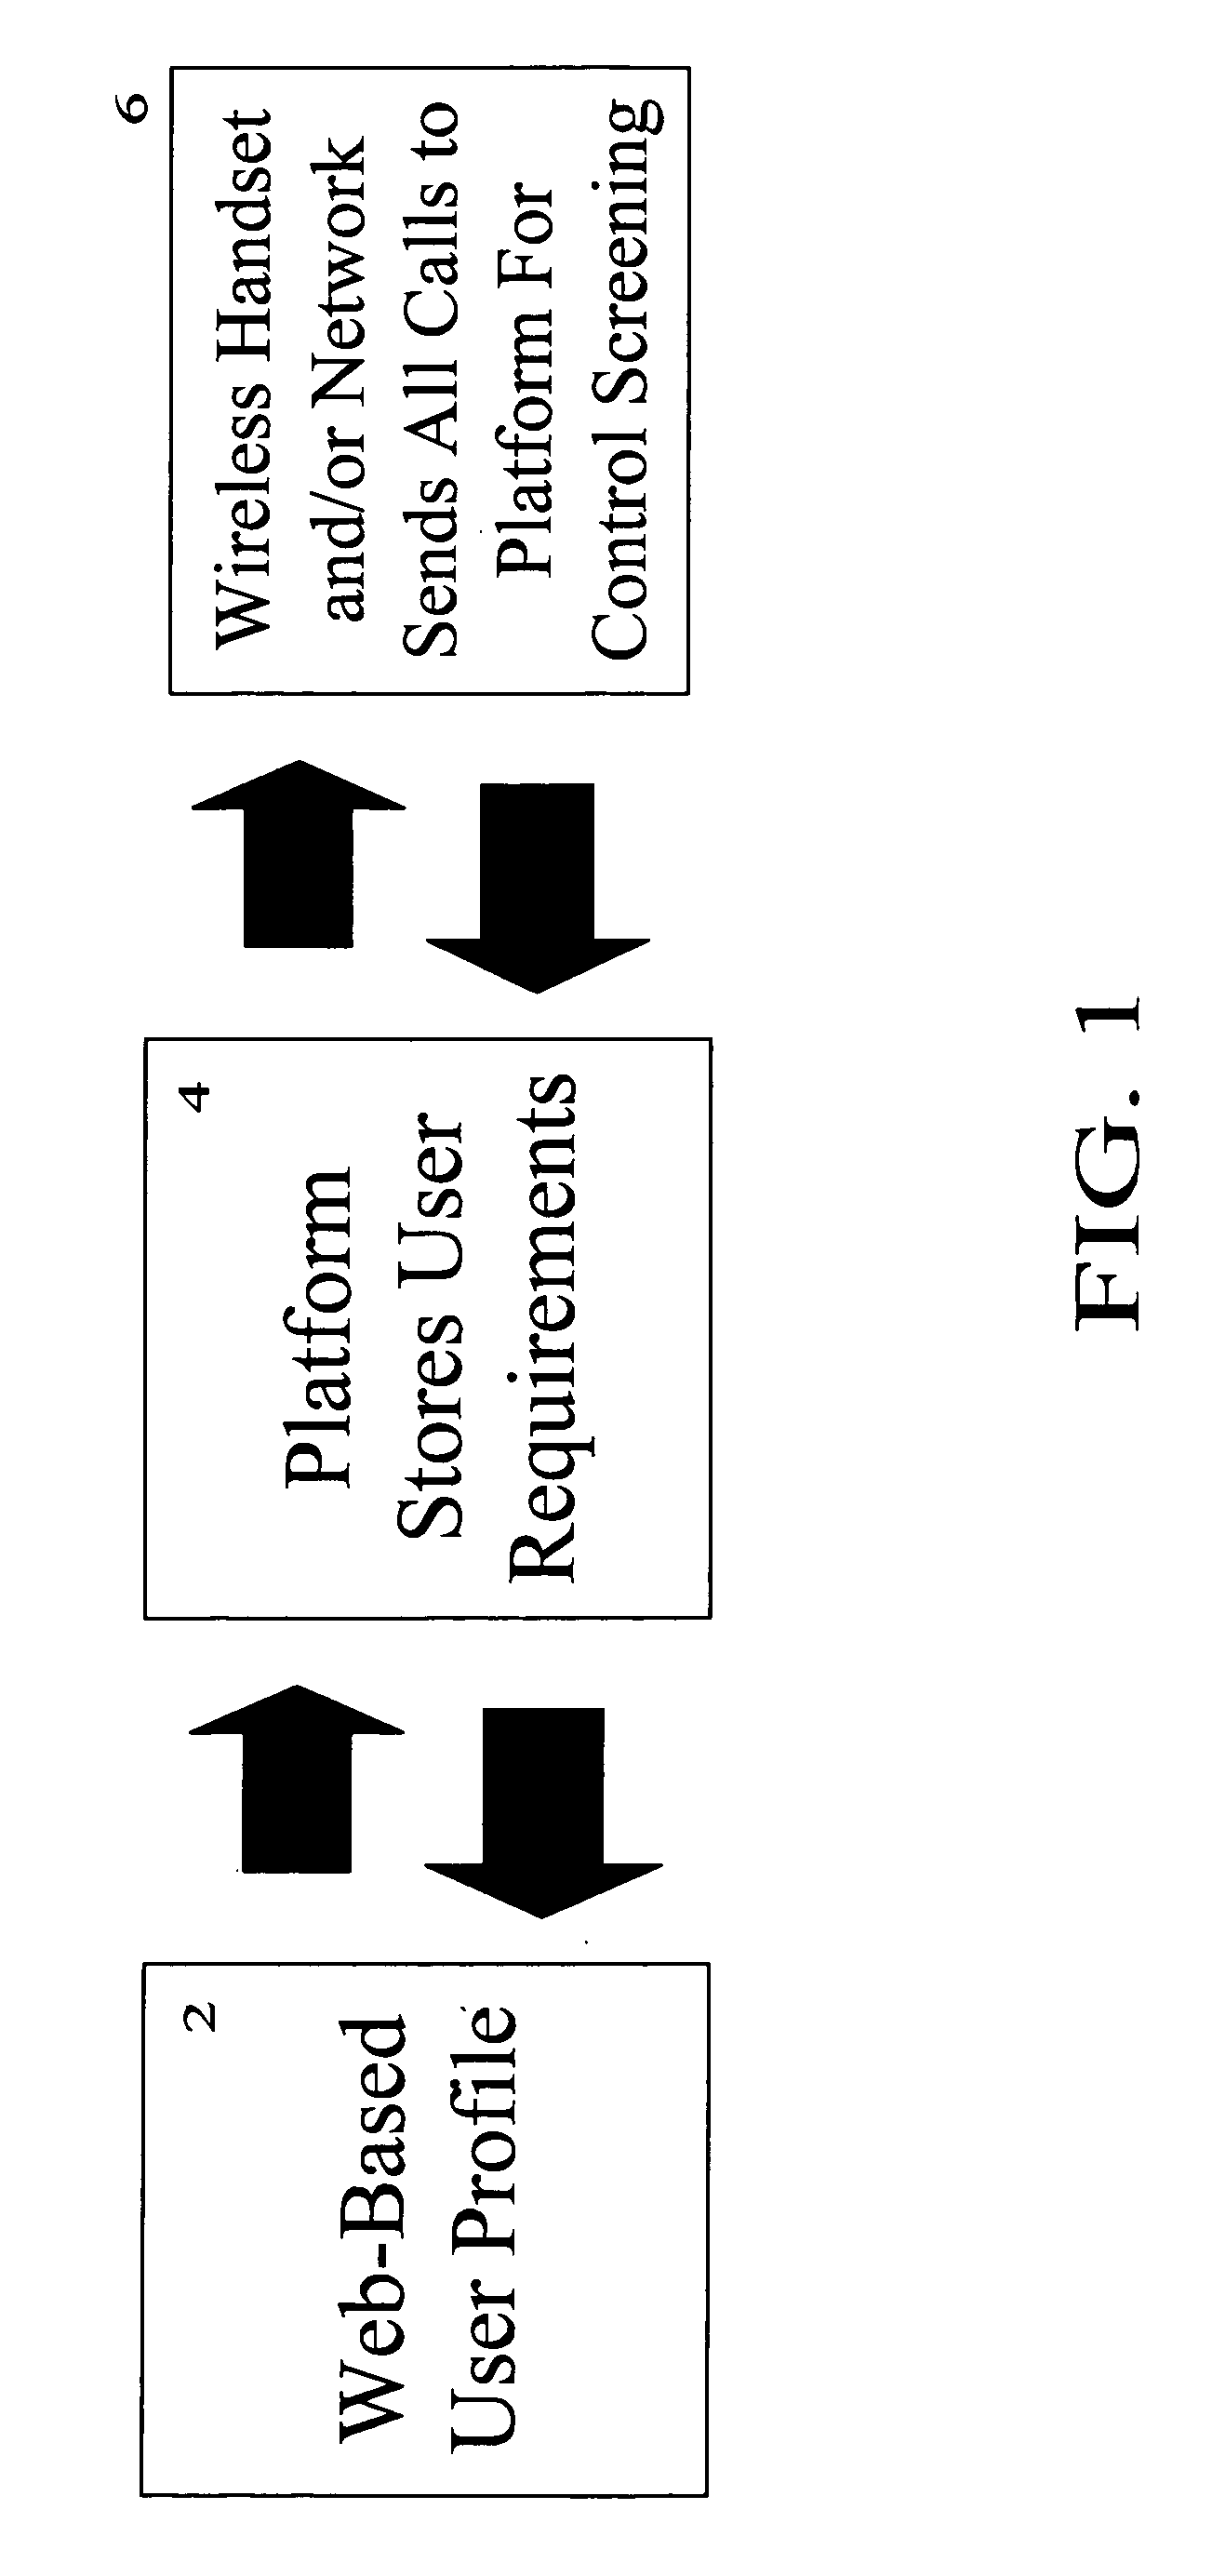 System and method for secure web-based mobile phone parental controls